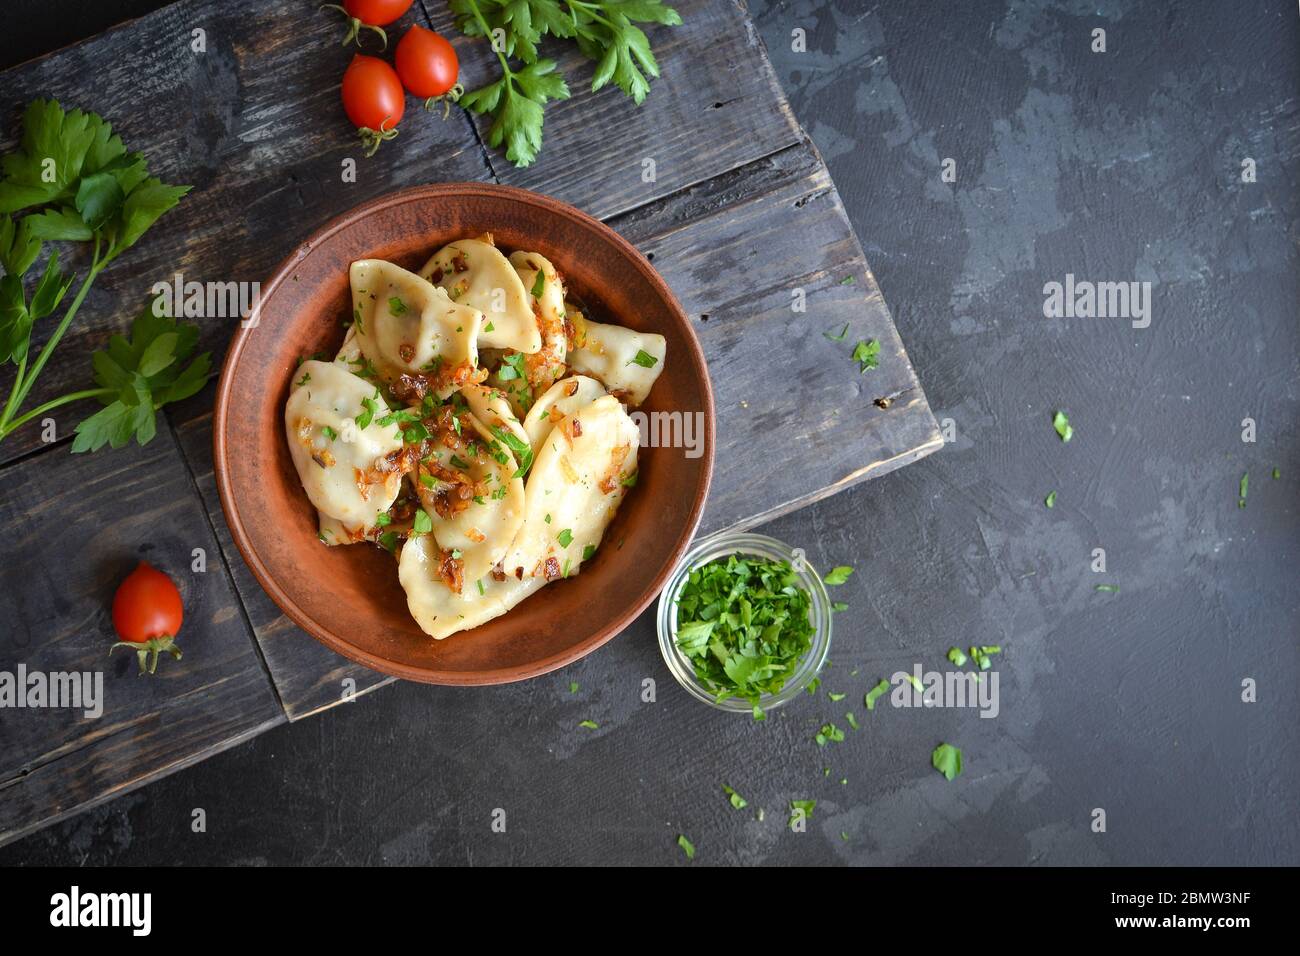 Dumplings with potato filling. Dumplings in a clay plate. Top view. Free space for text. Stock Photo